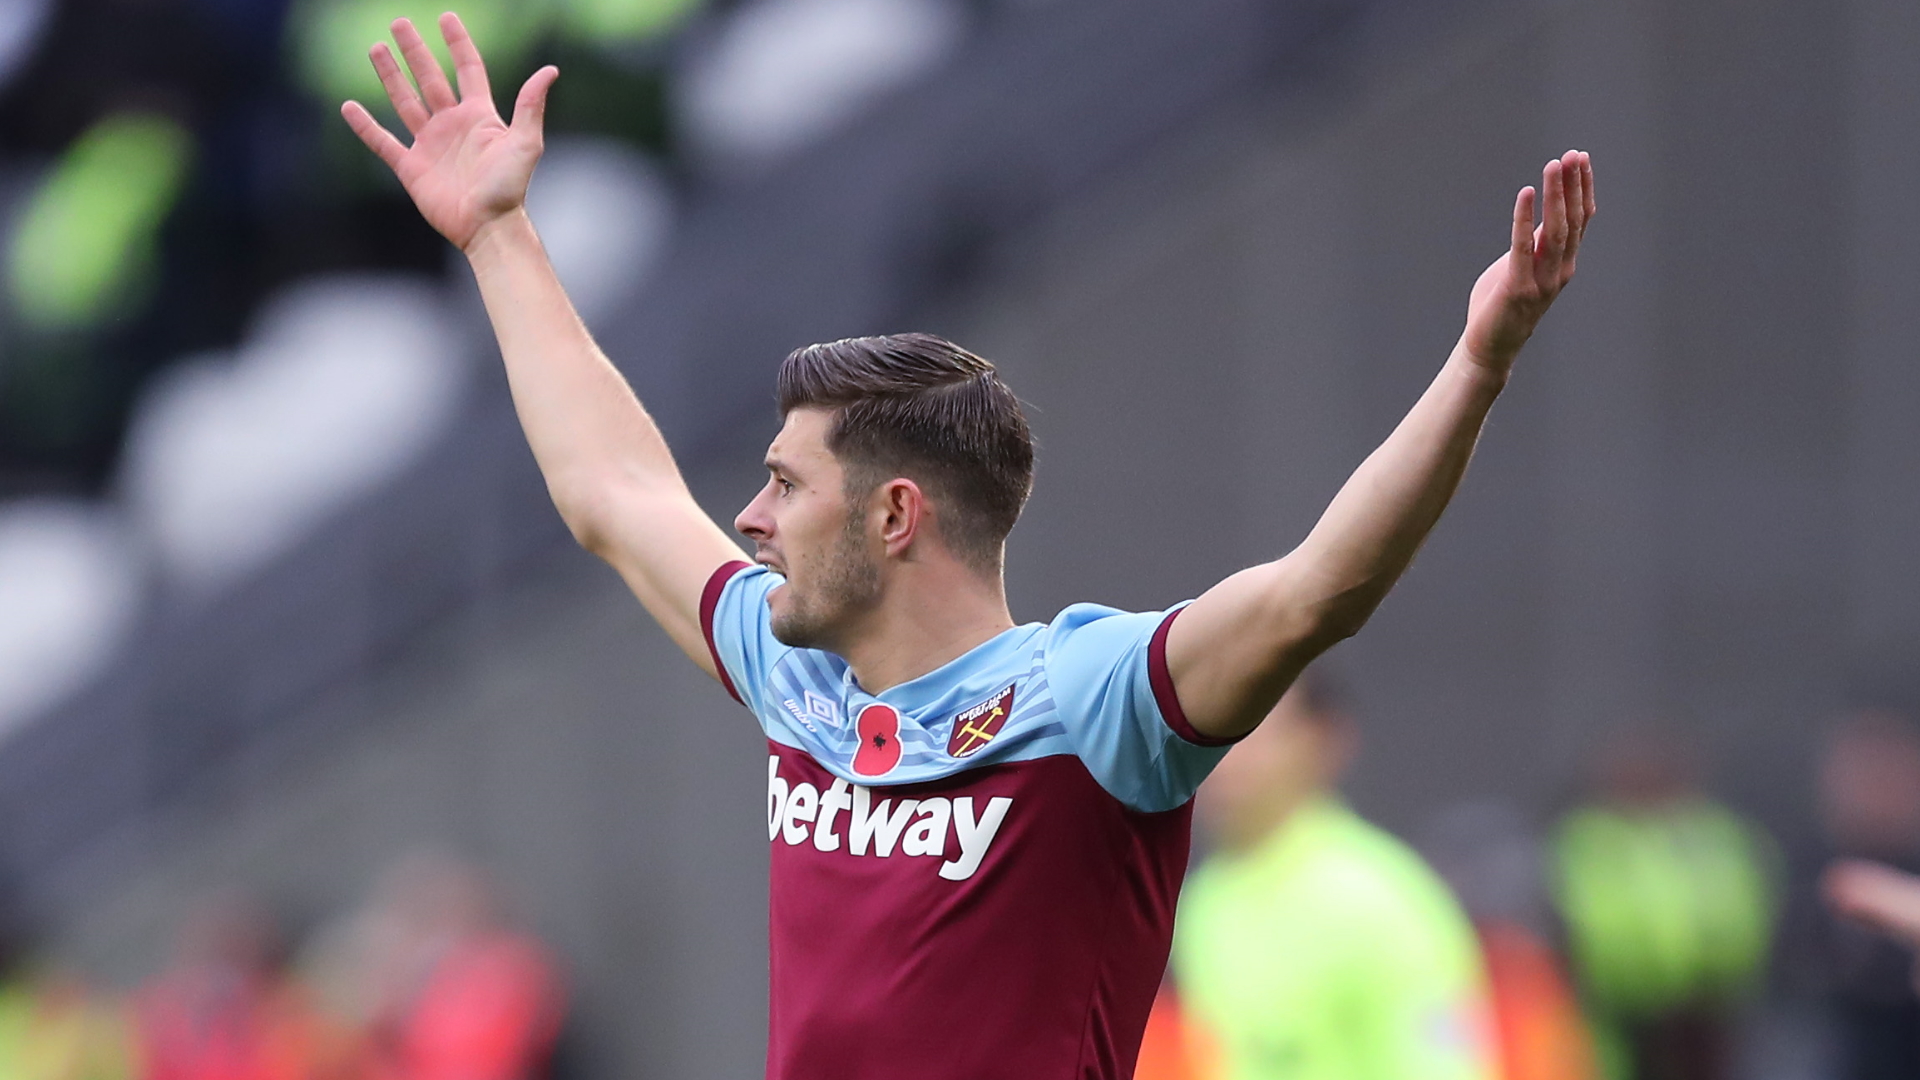 West Ham fans right to boo us off the pitch after Newcastle loss - Cresswell